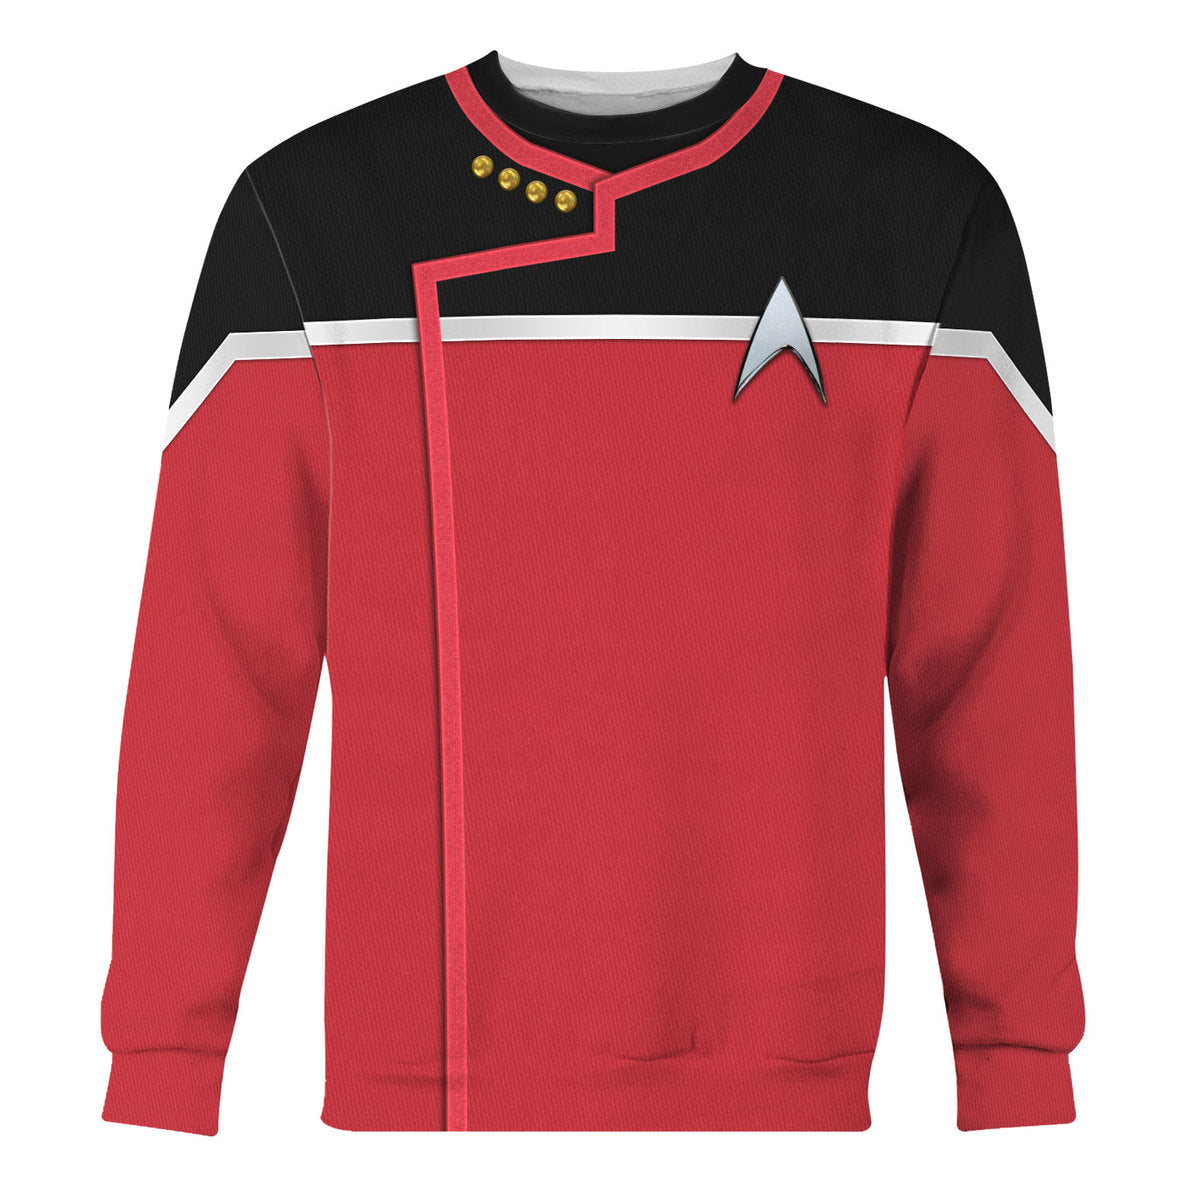 Star Trek Dress Uniform Command Division Cool - Sweater - Ugly Christmas Sweater